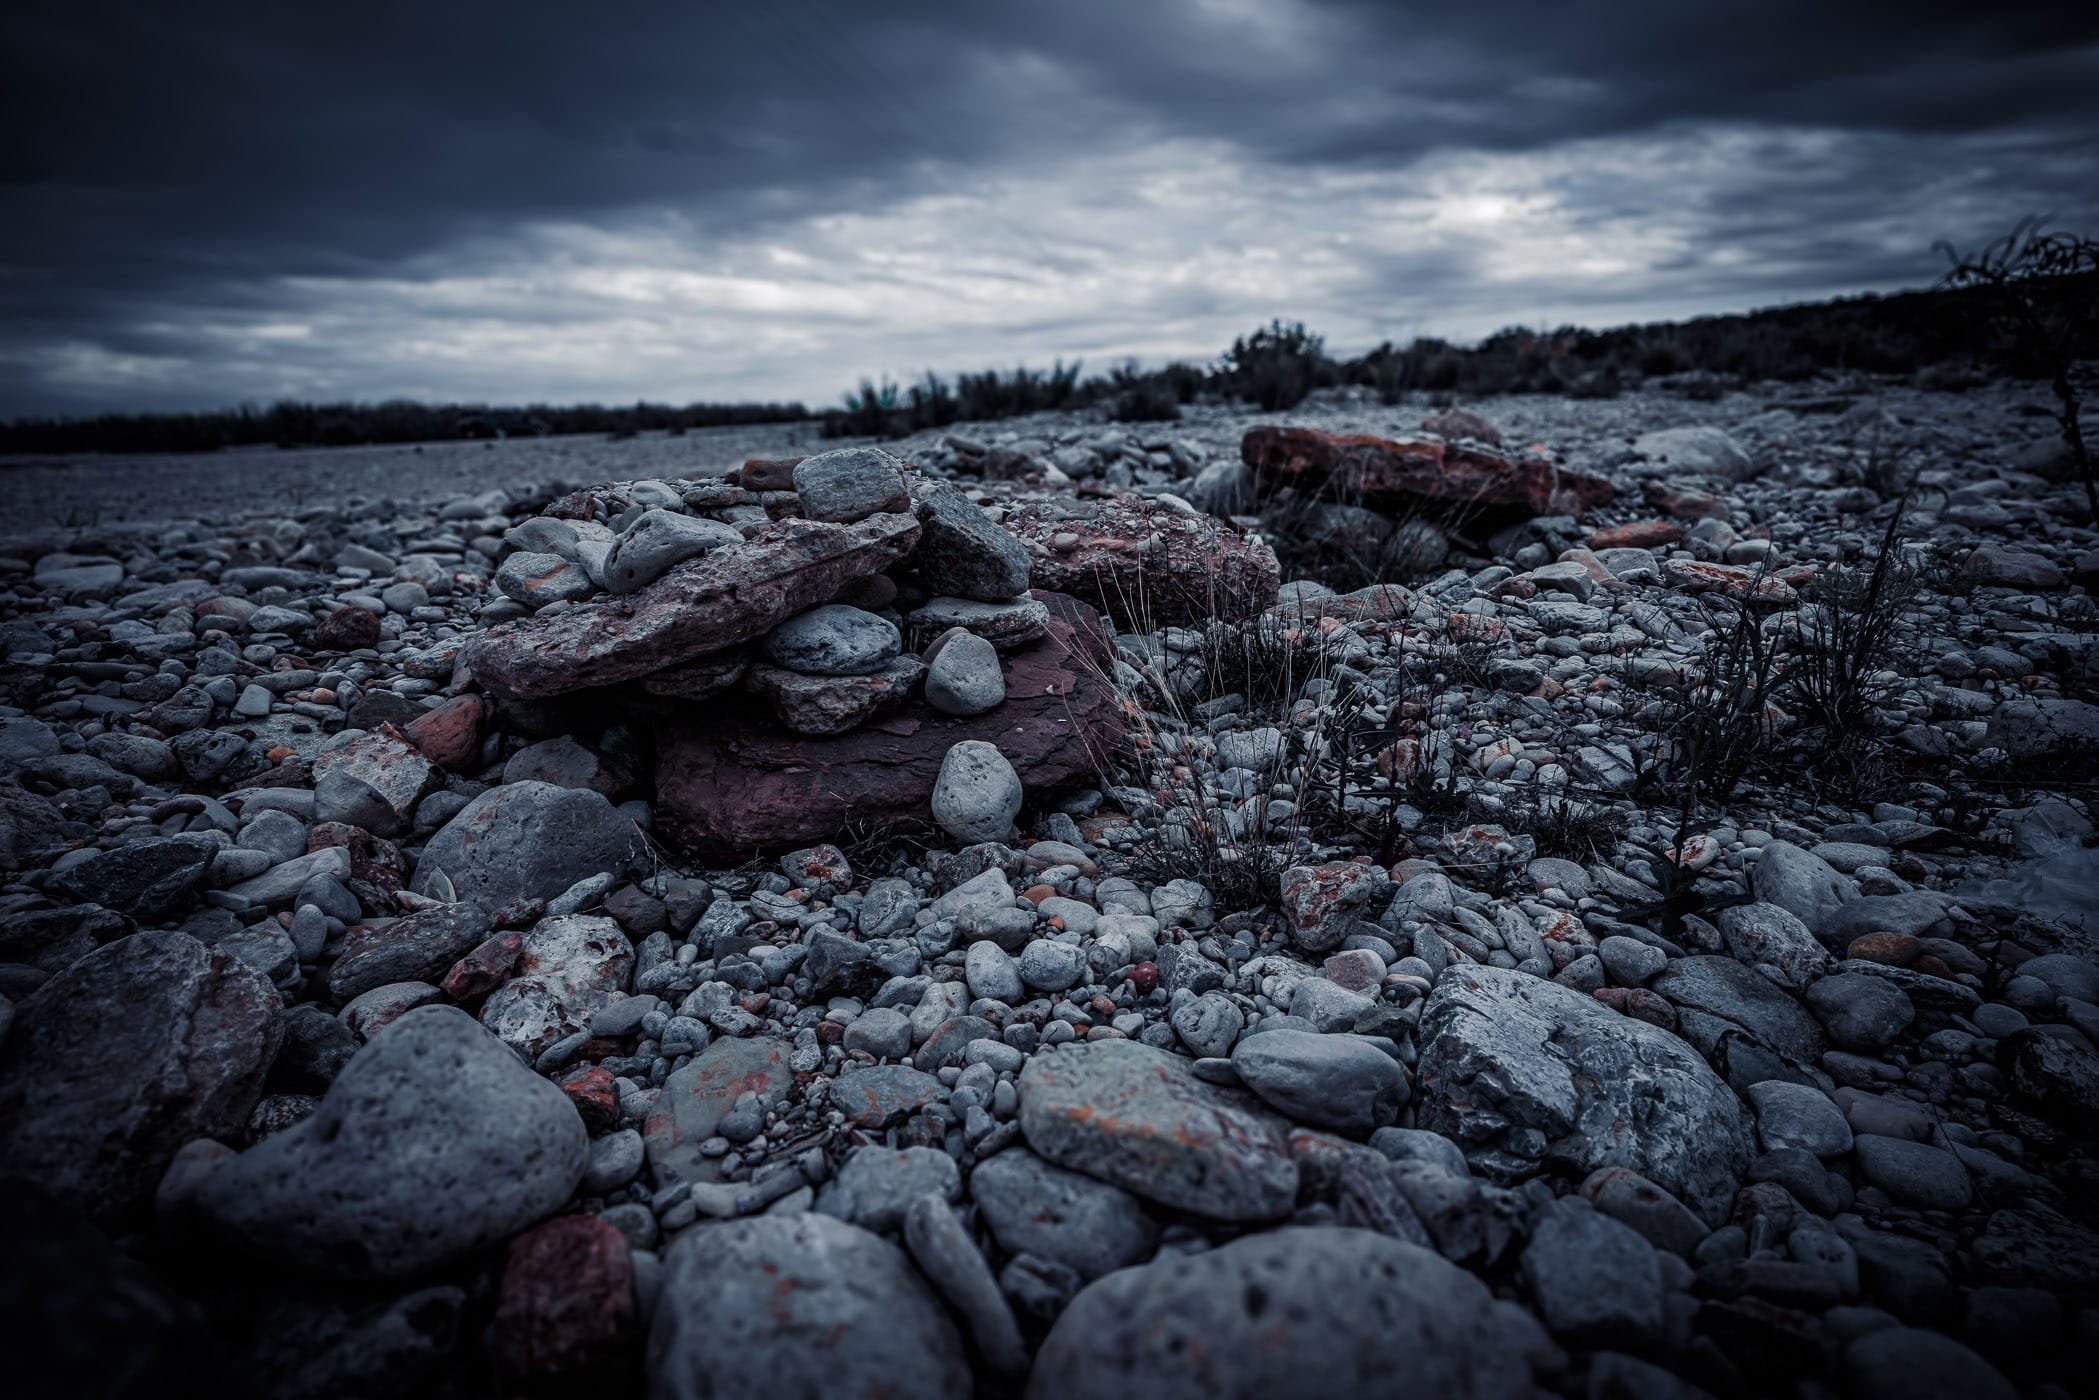 The rocky riverbed at the confluence of the Llano River and James River near Mason, Texas.